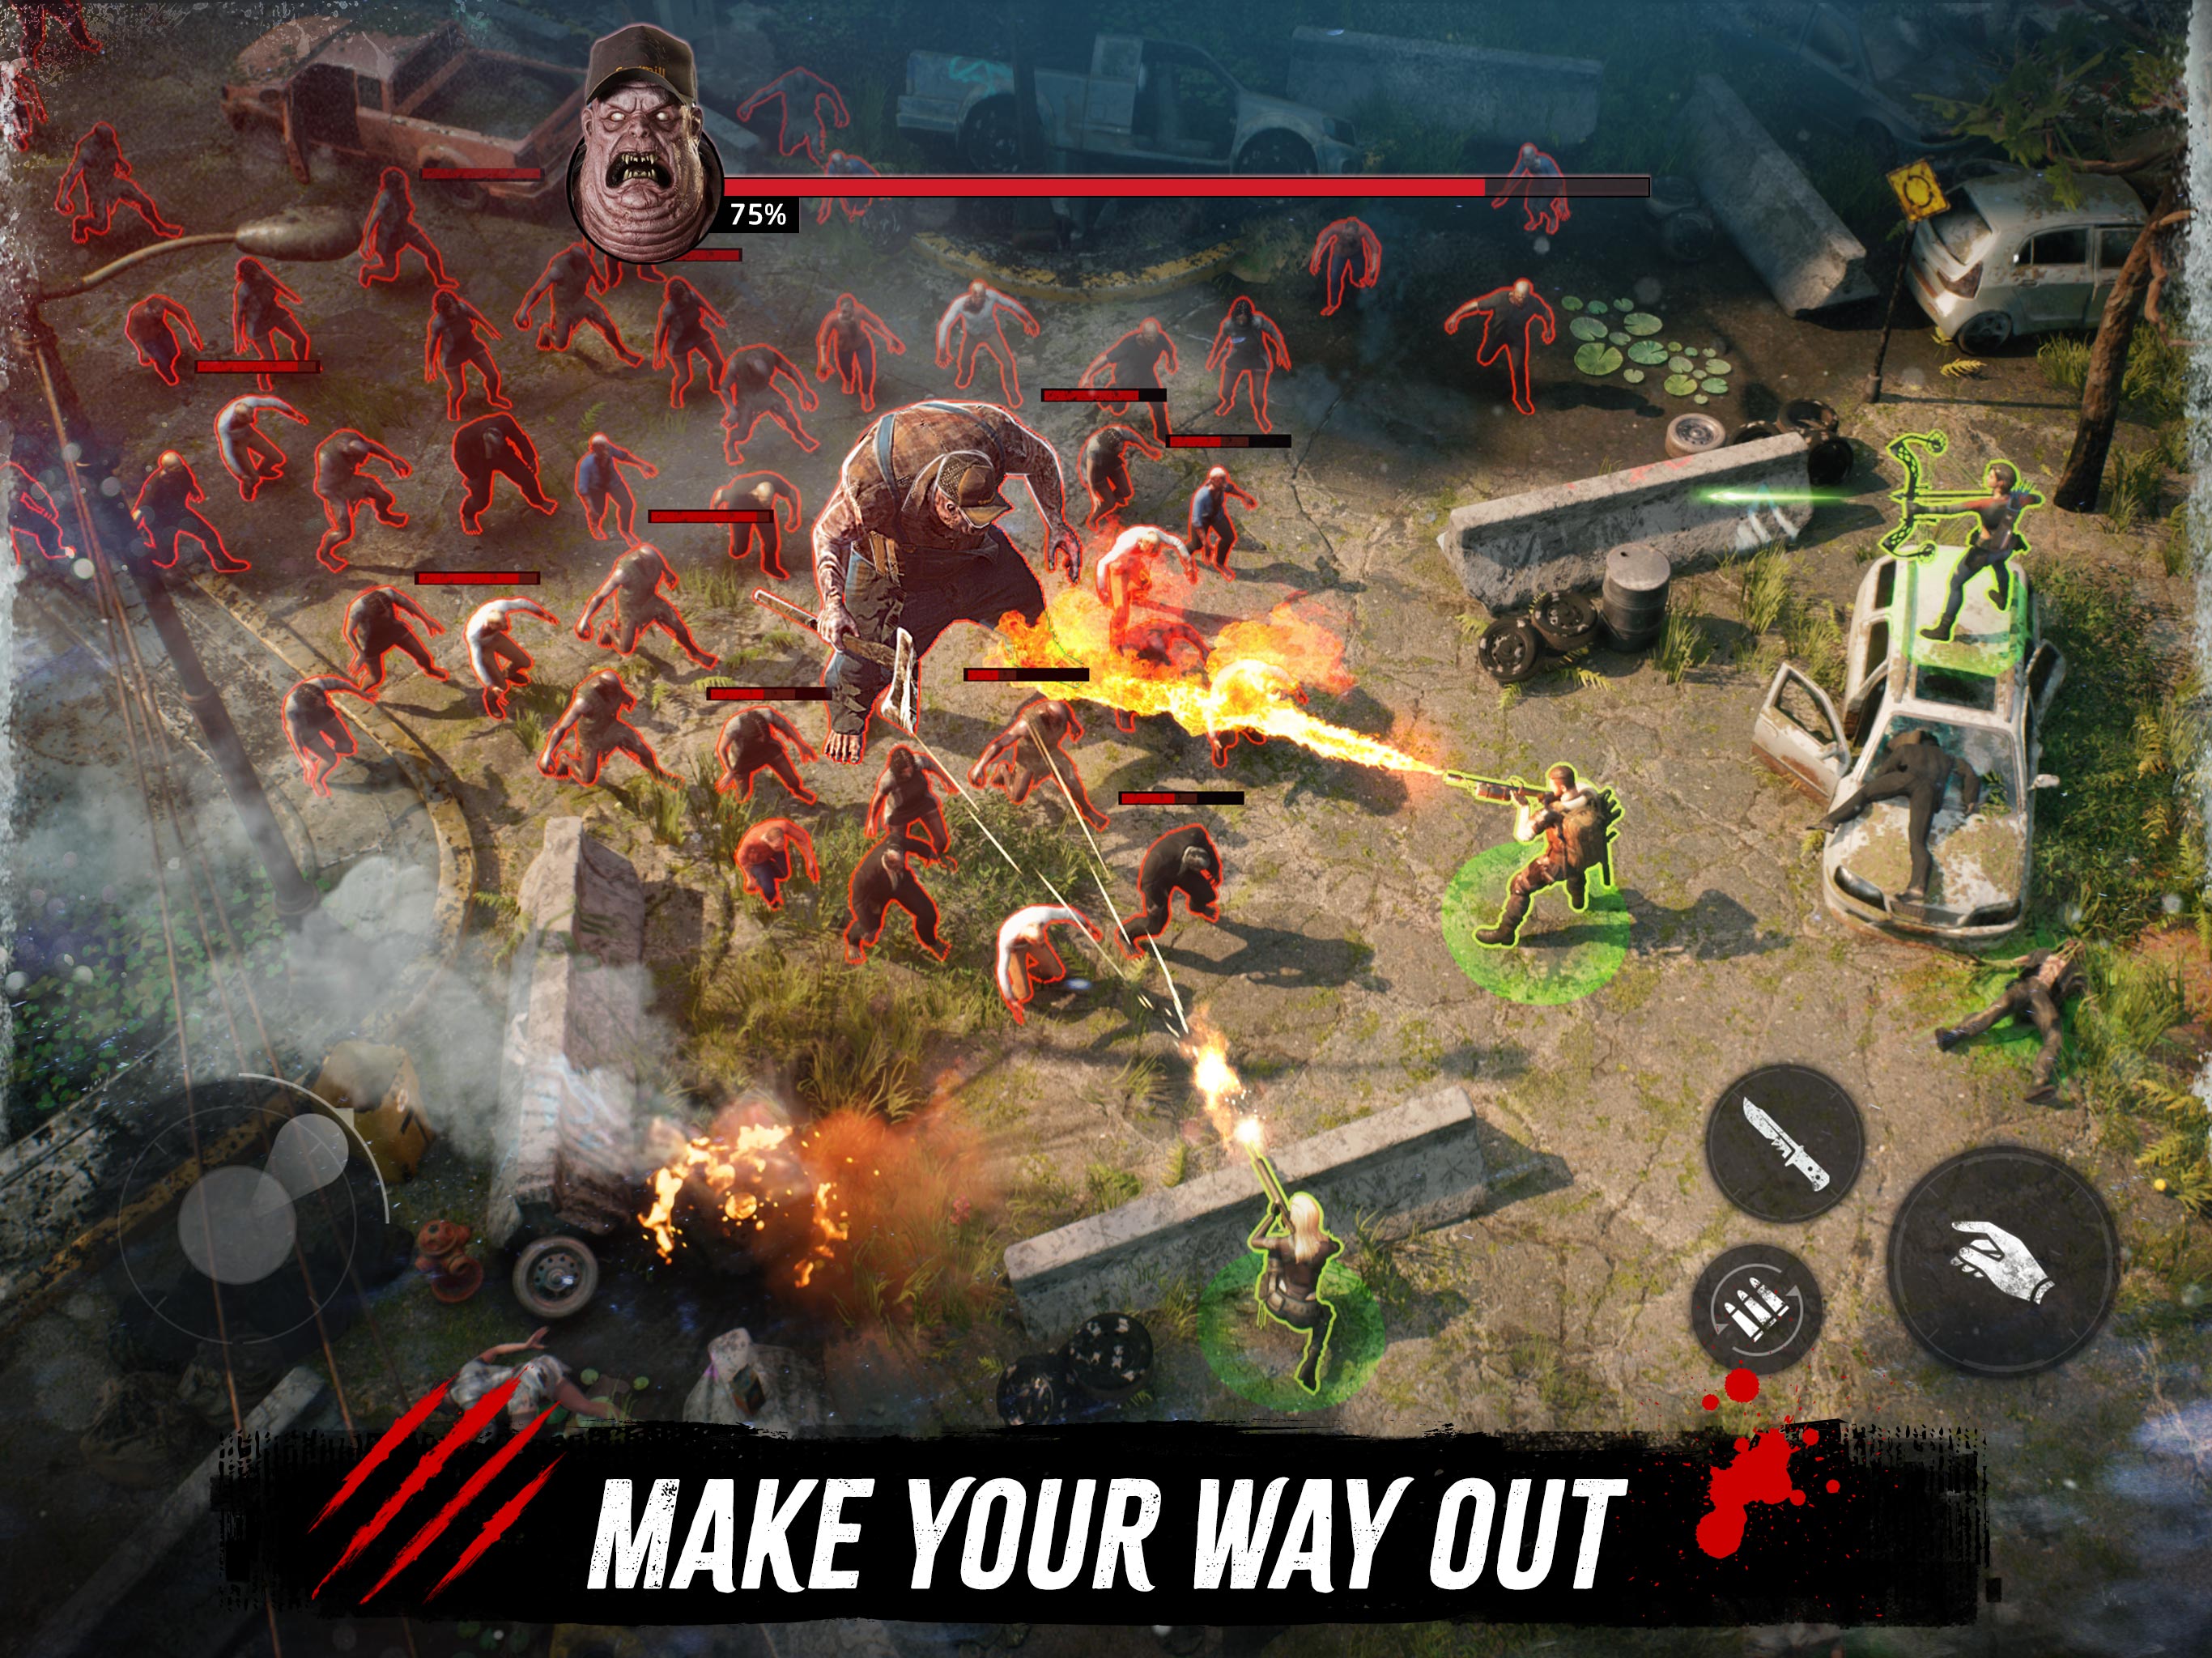 Dead Warfare RPG Gun Zombies Games Android Gameplay